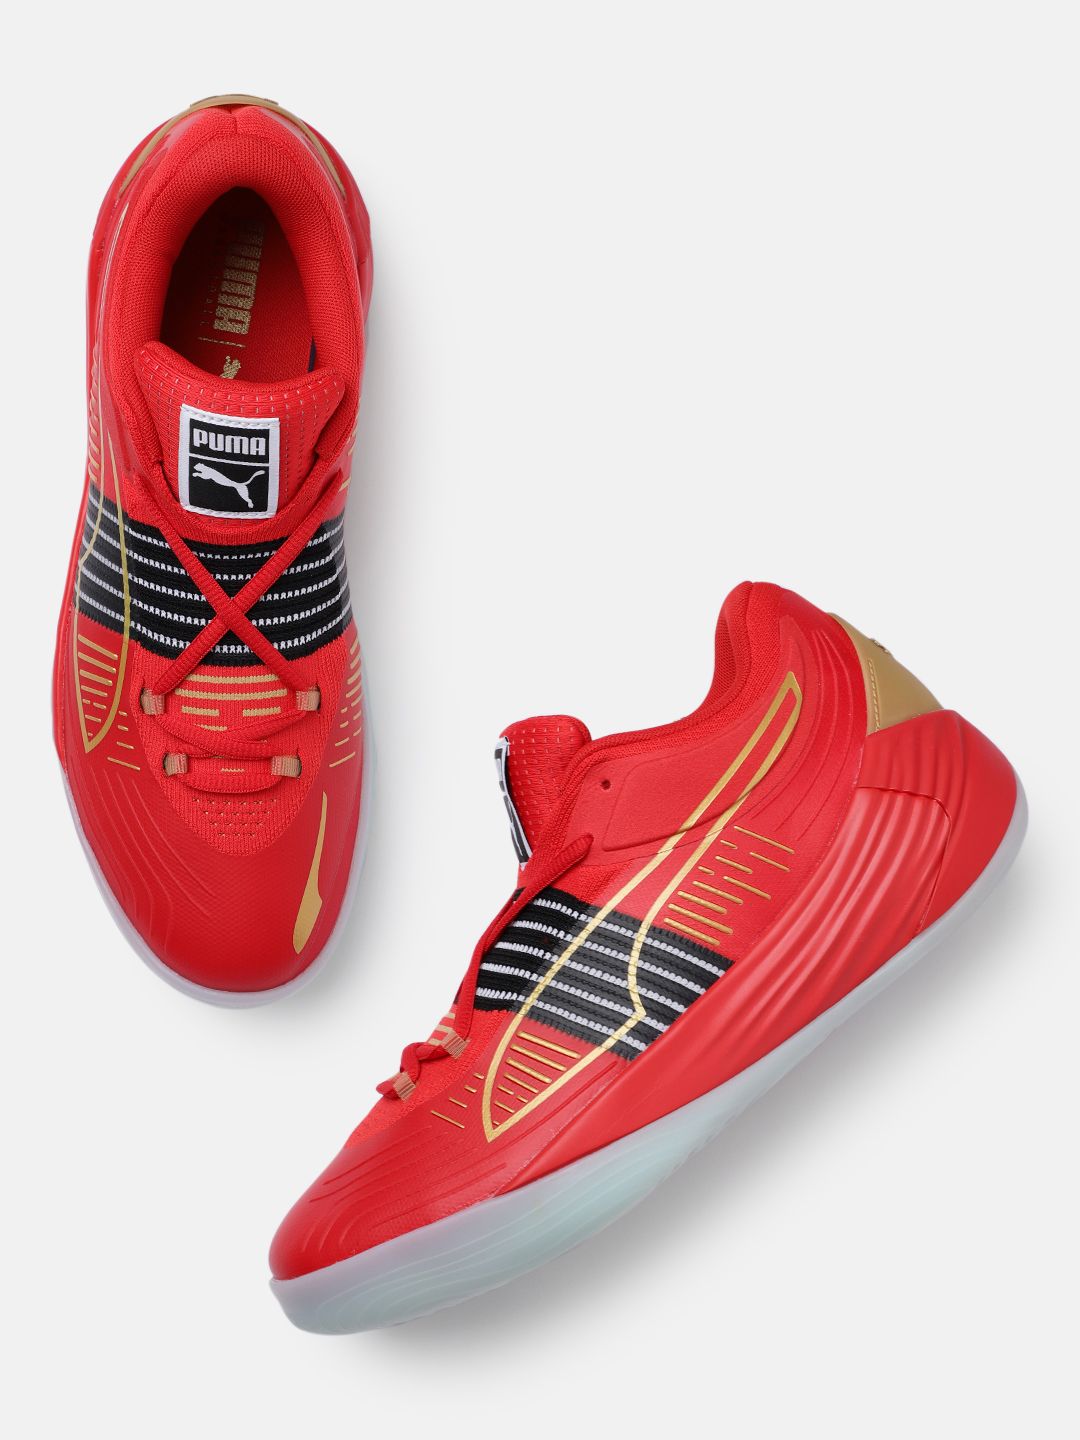 PUMA Hoops Unisex Red Textile Fusion Nitro Basketball Sneakers Price in India